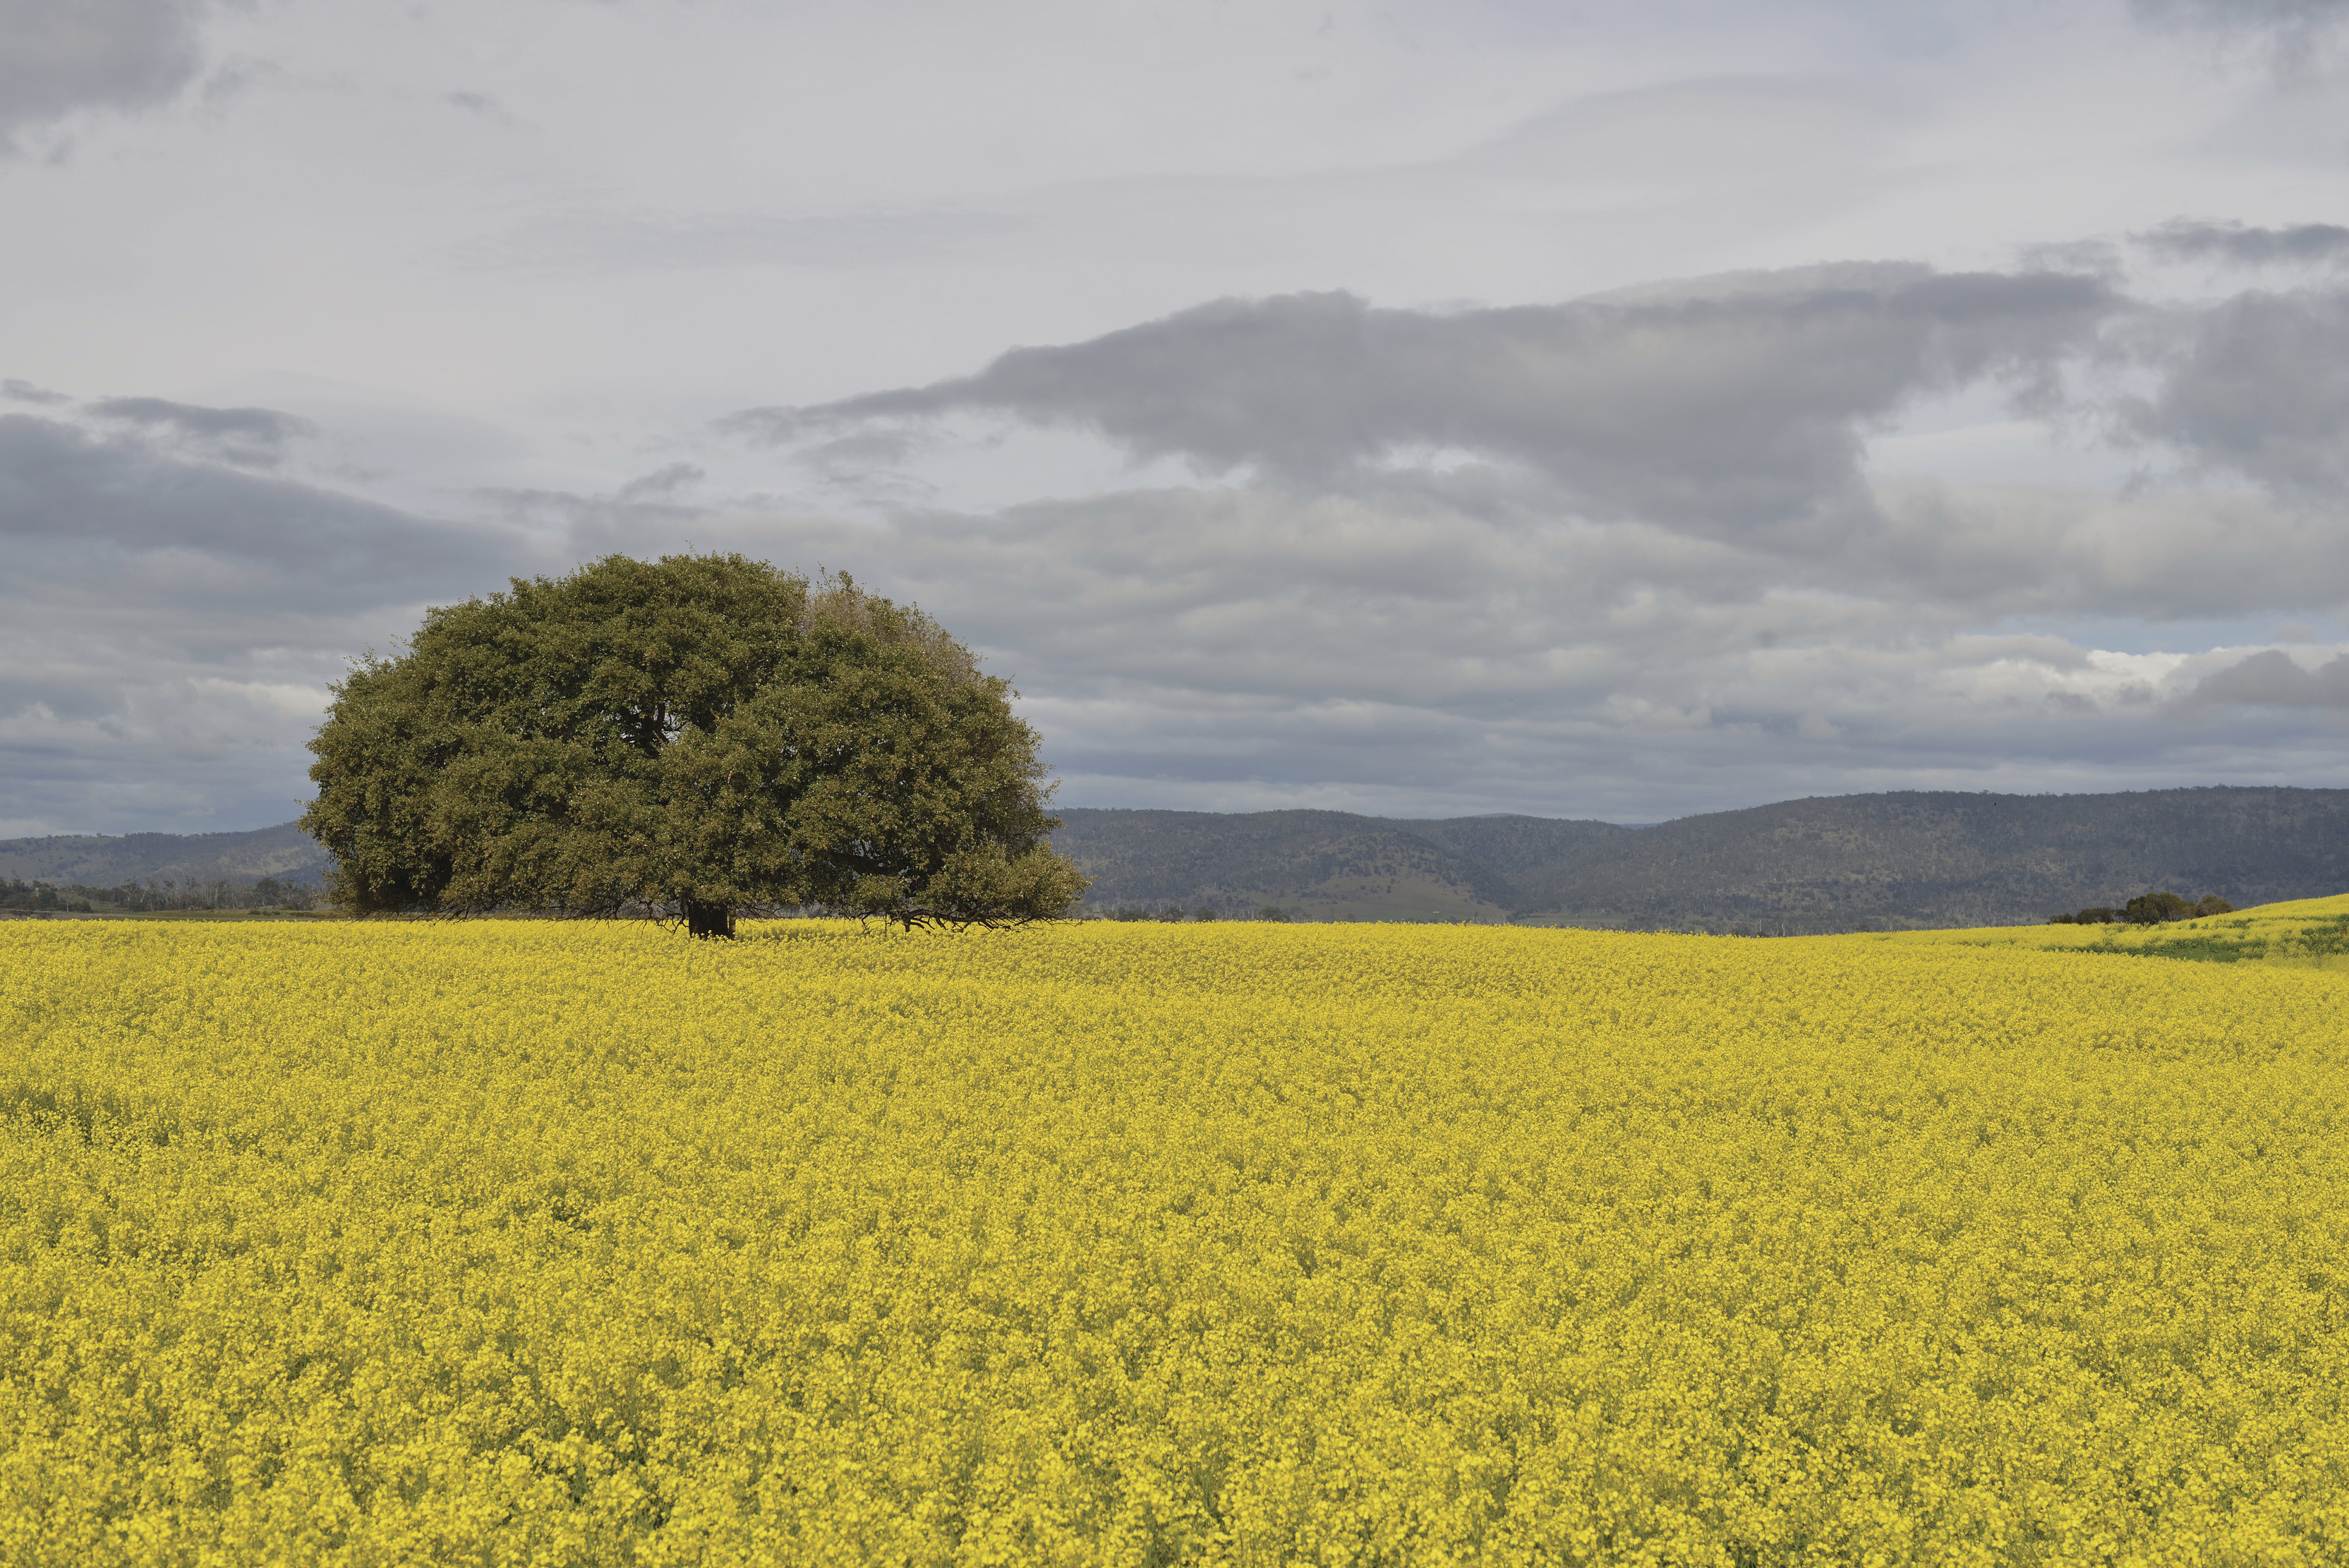 Ariel of the yellow Canola field, with a large green tree in the center.